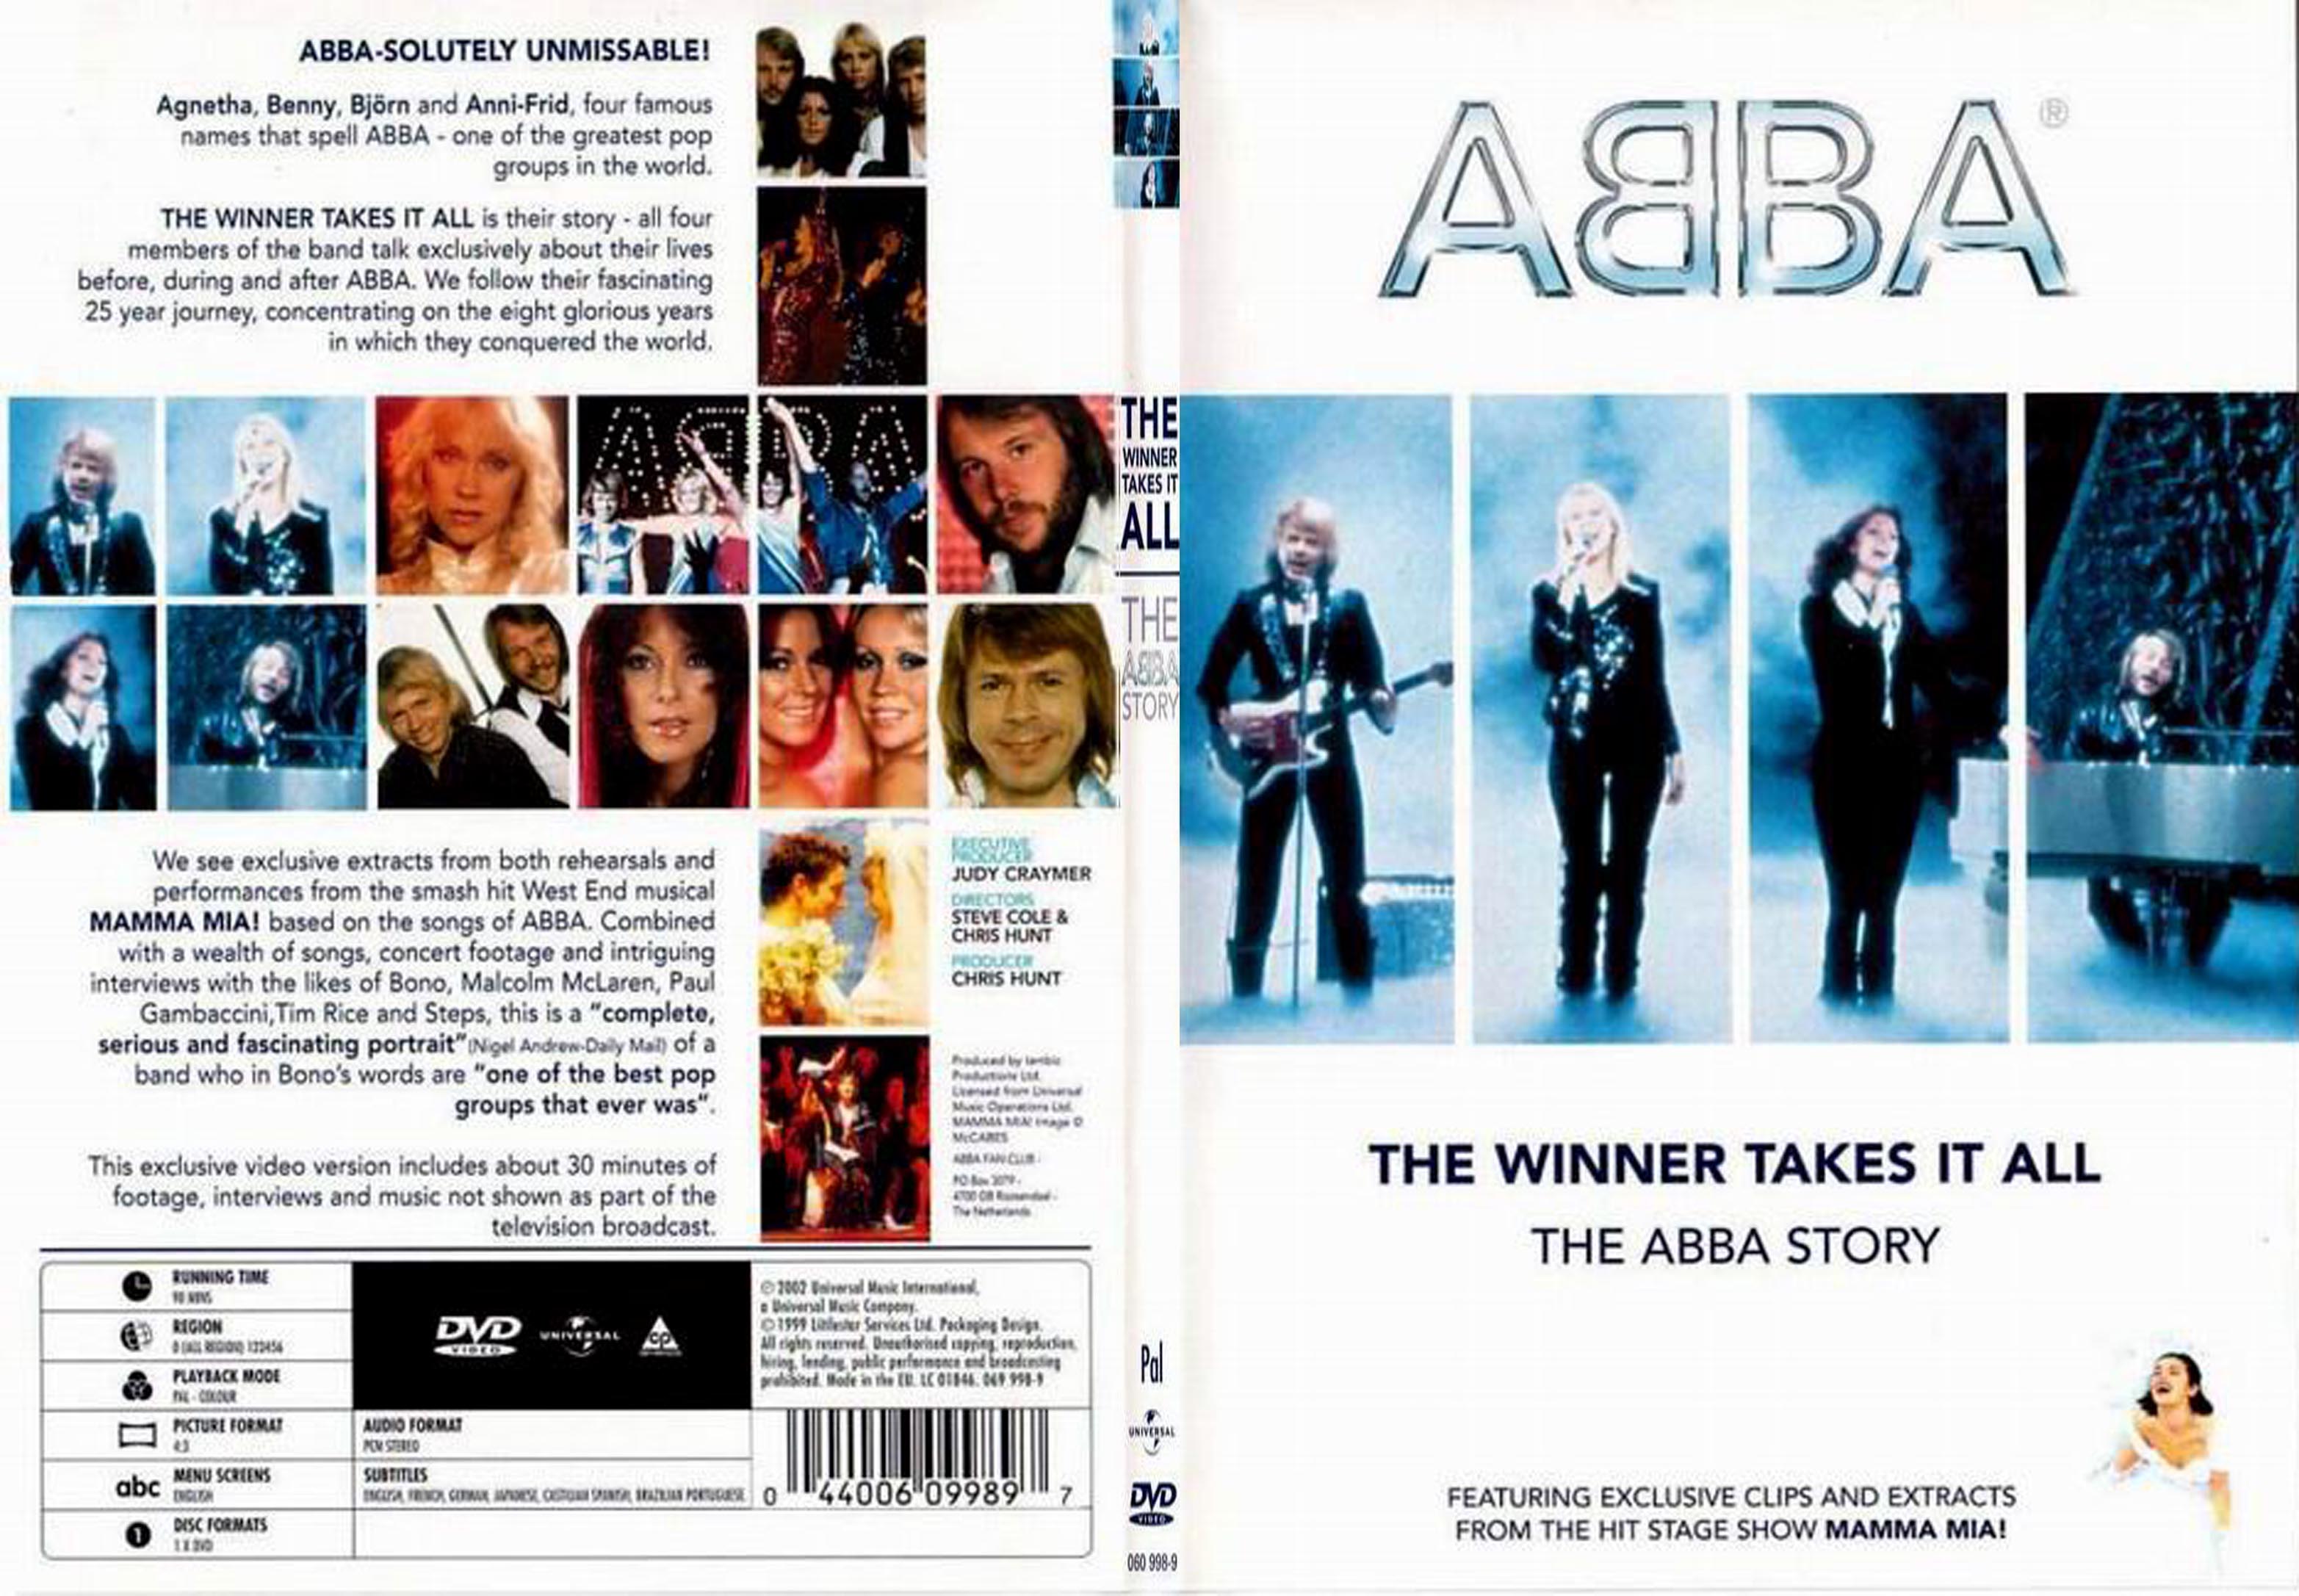 Jaquette DVD Abba The Winner Takes It All - SLIM